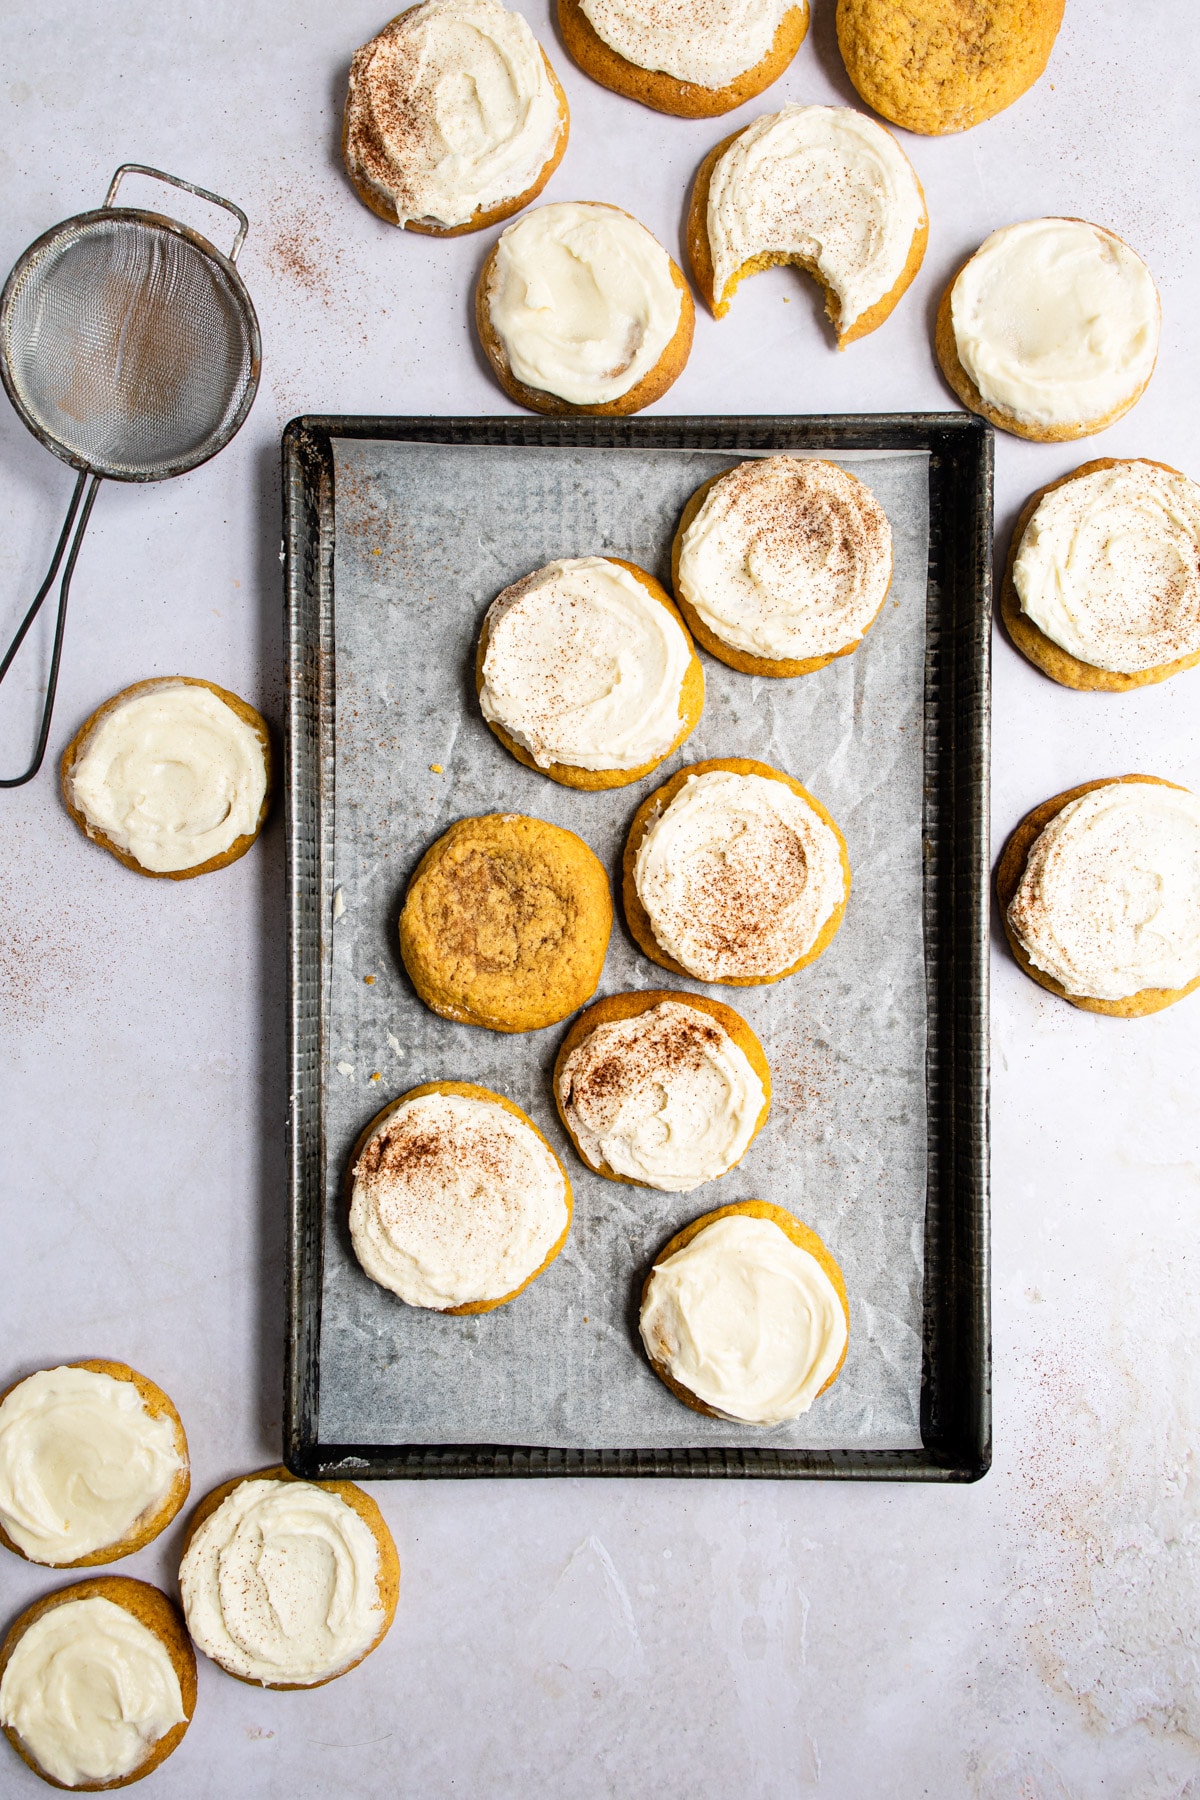 Frosted pumpkin cookies on a baking tray.